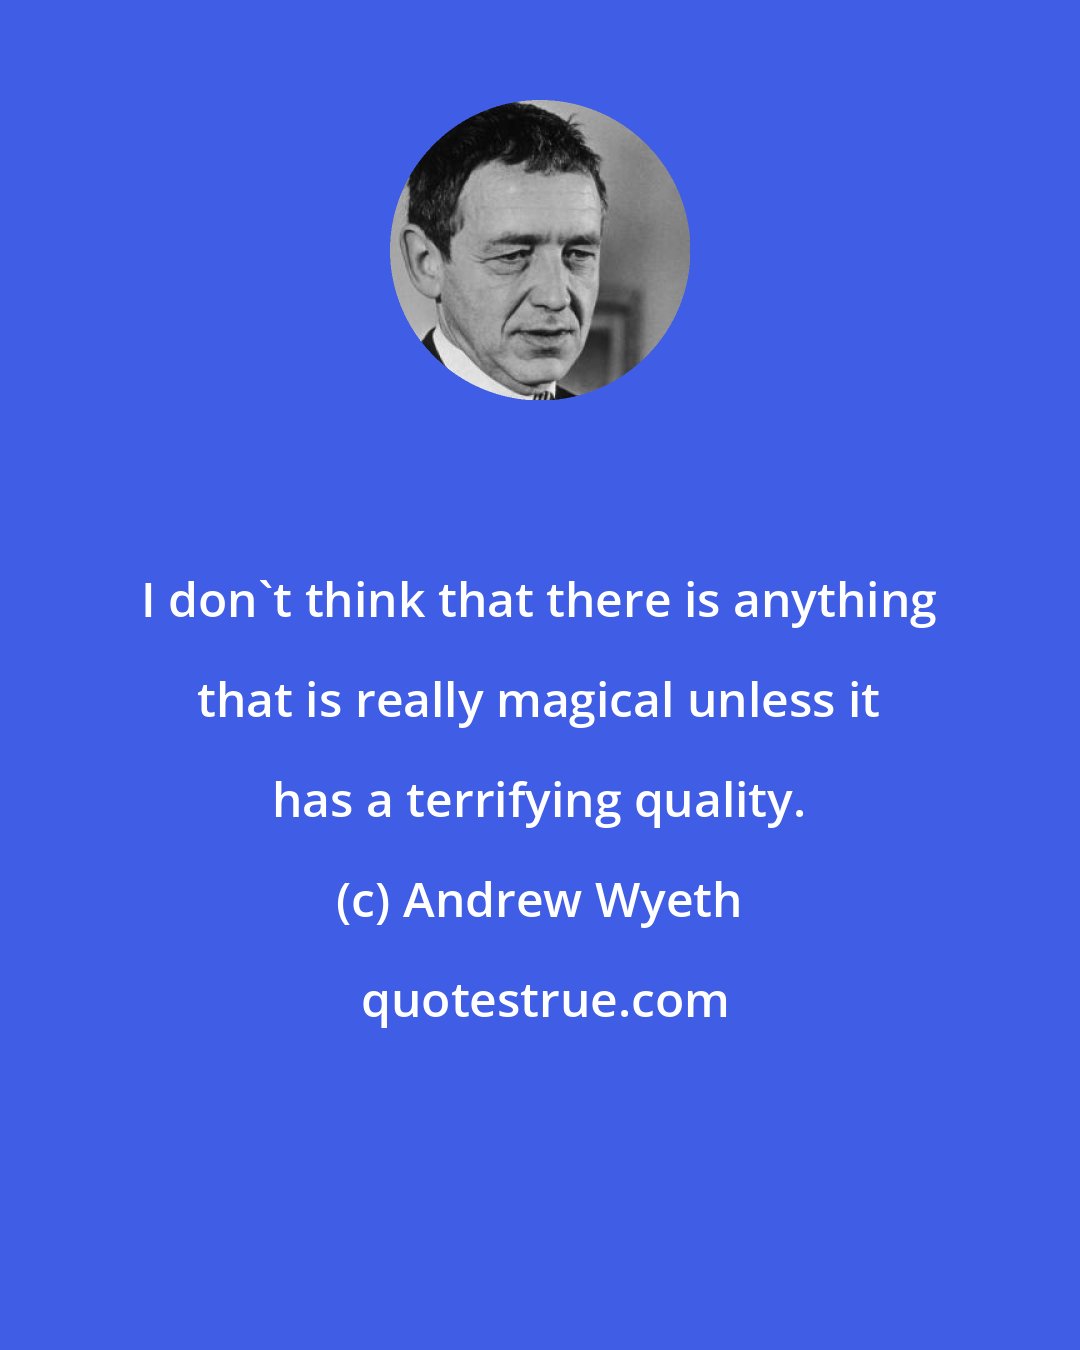 Andrew Wyeth: I don't think that there is anything that is really magical unless it has a terrifying quality.